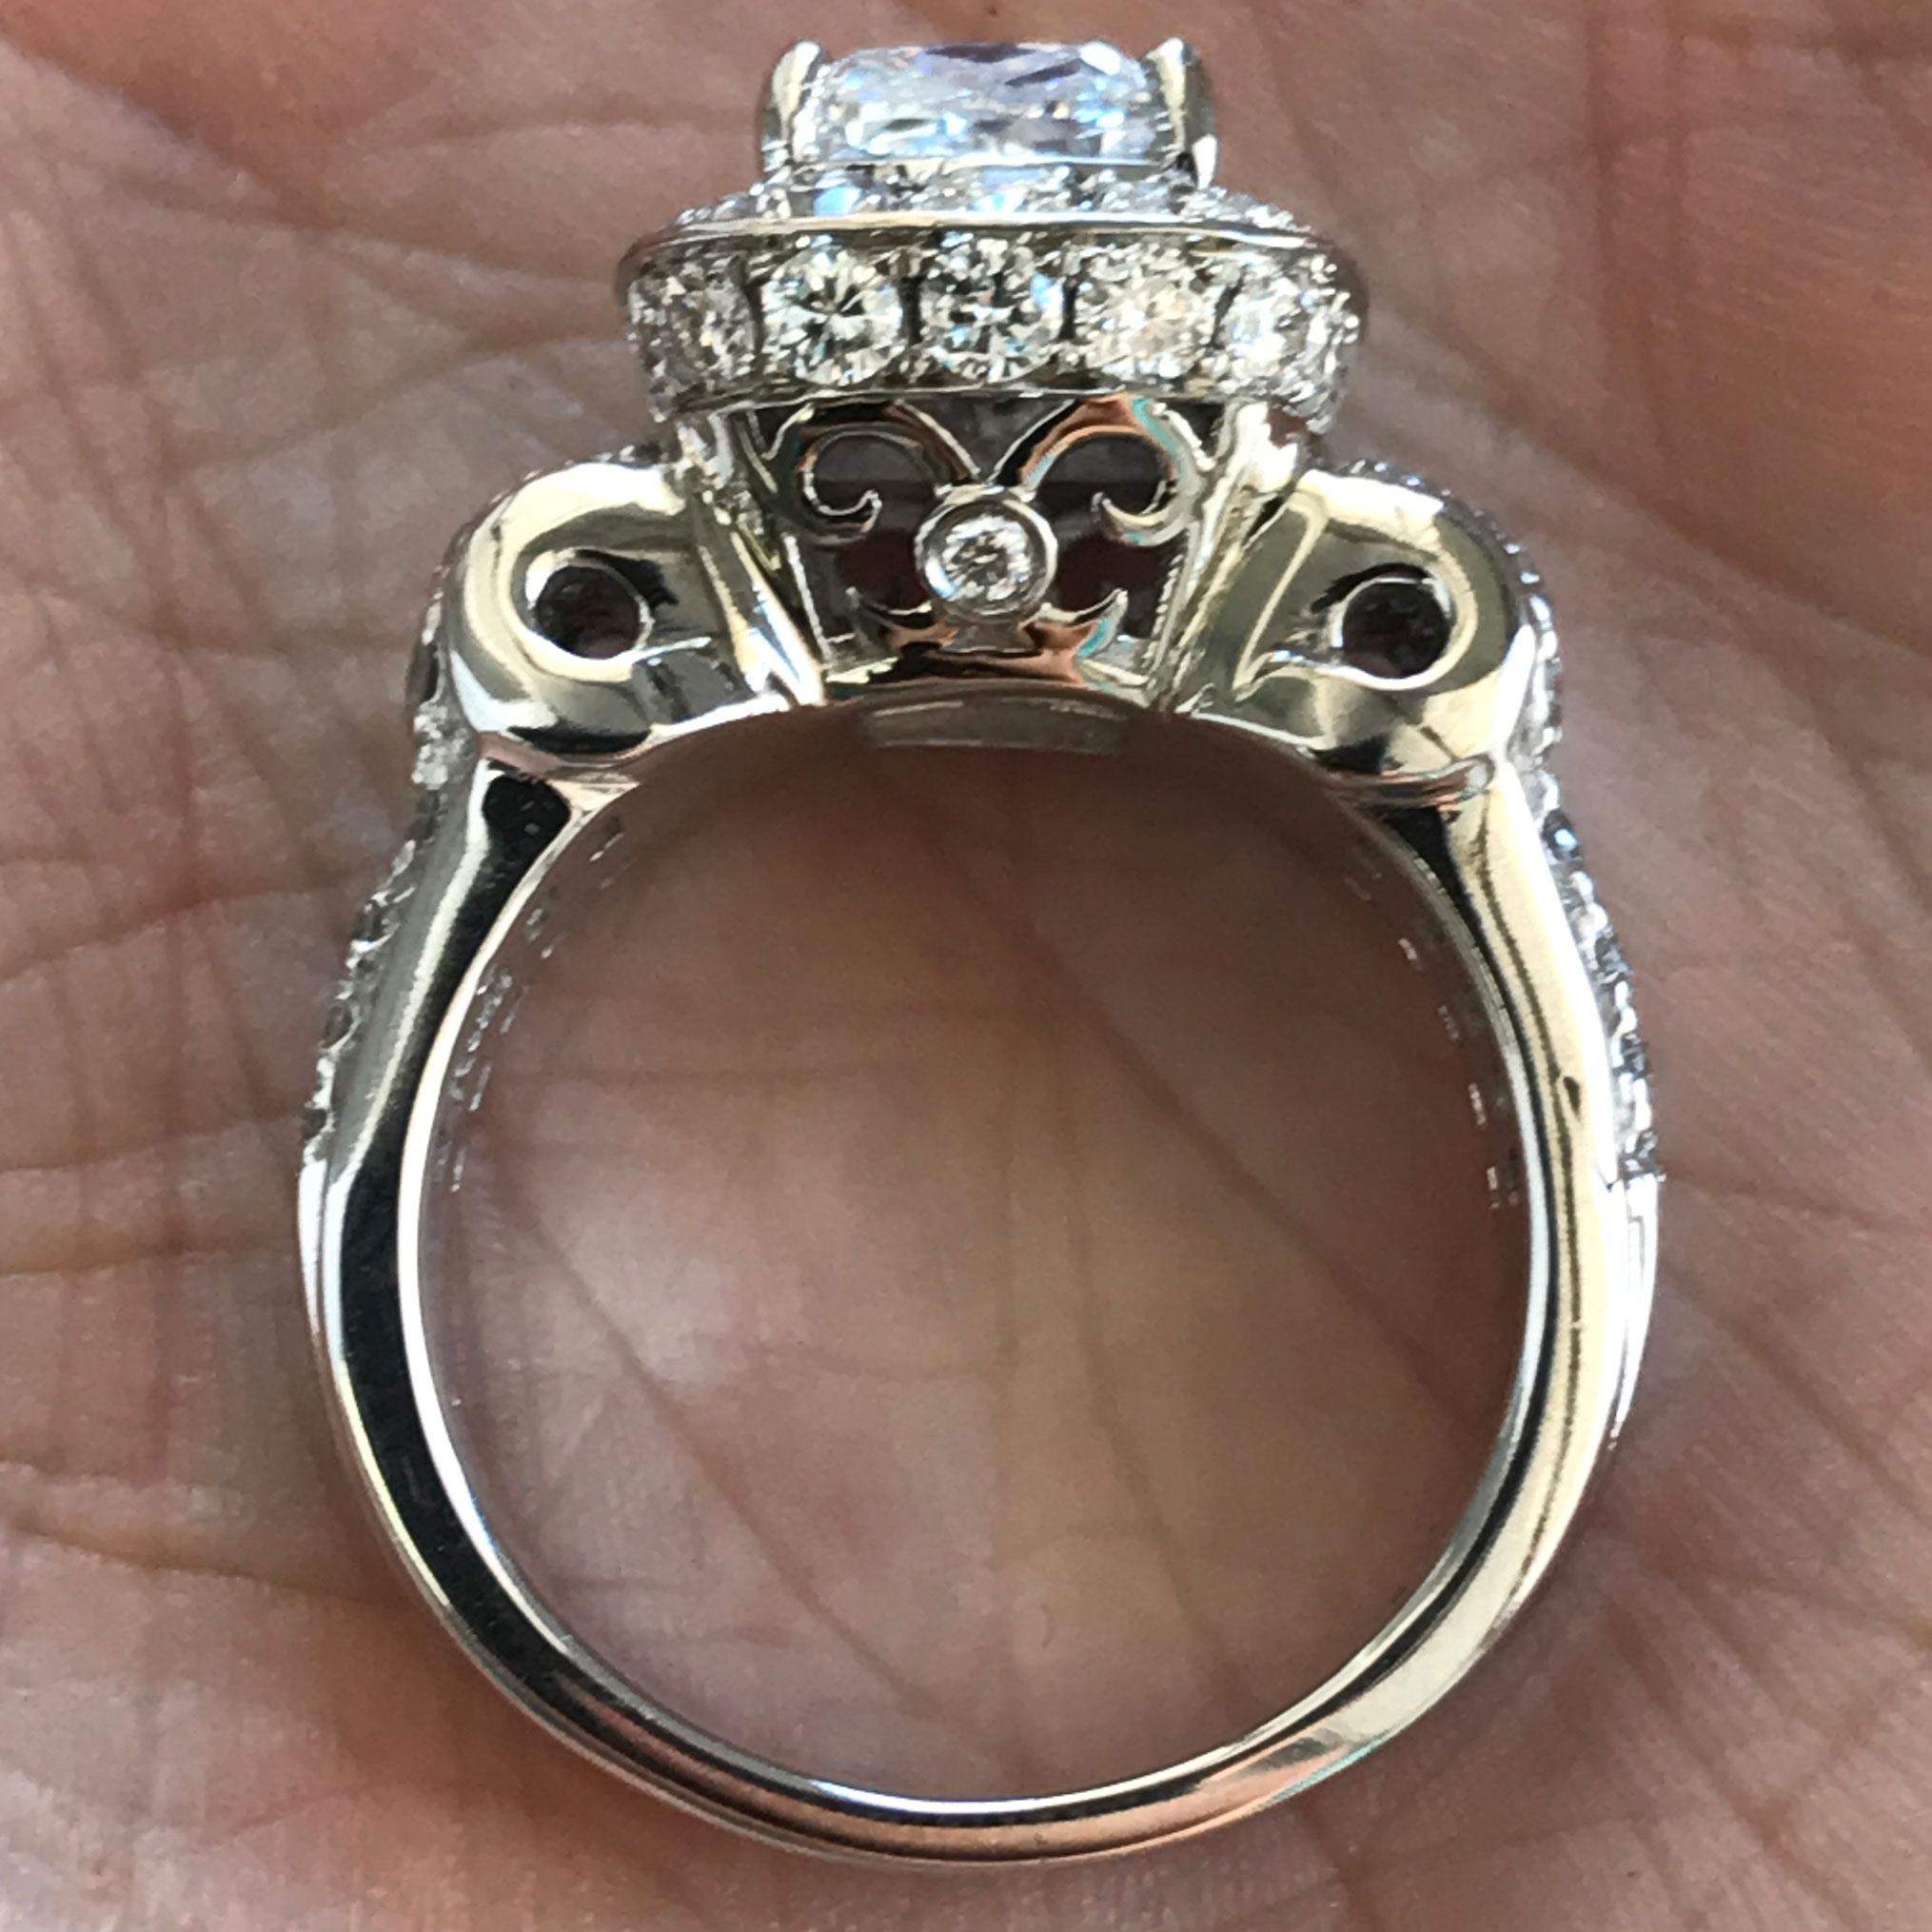 AS023-2000071

Ring will be made to order and can be purchased without the center stone. I can supply a different center stone to fit your budget if it is higher or lower. Will take approximately 1-2 business weeks from the date you approve the